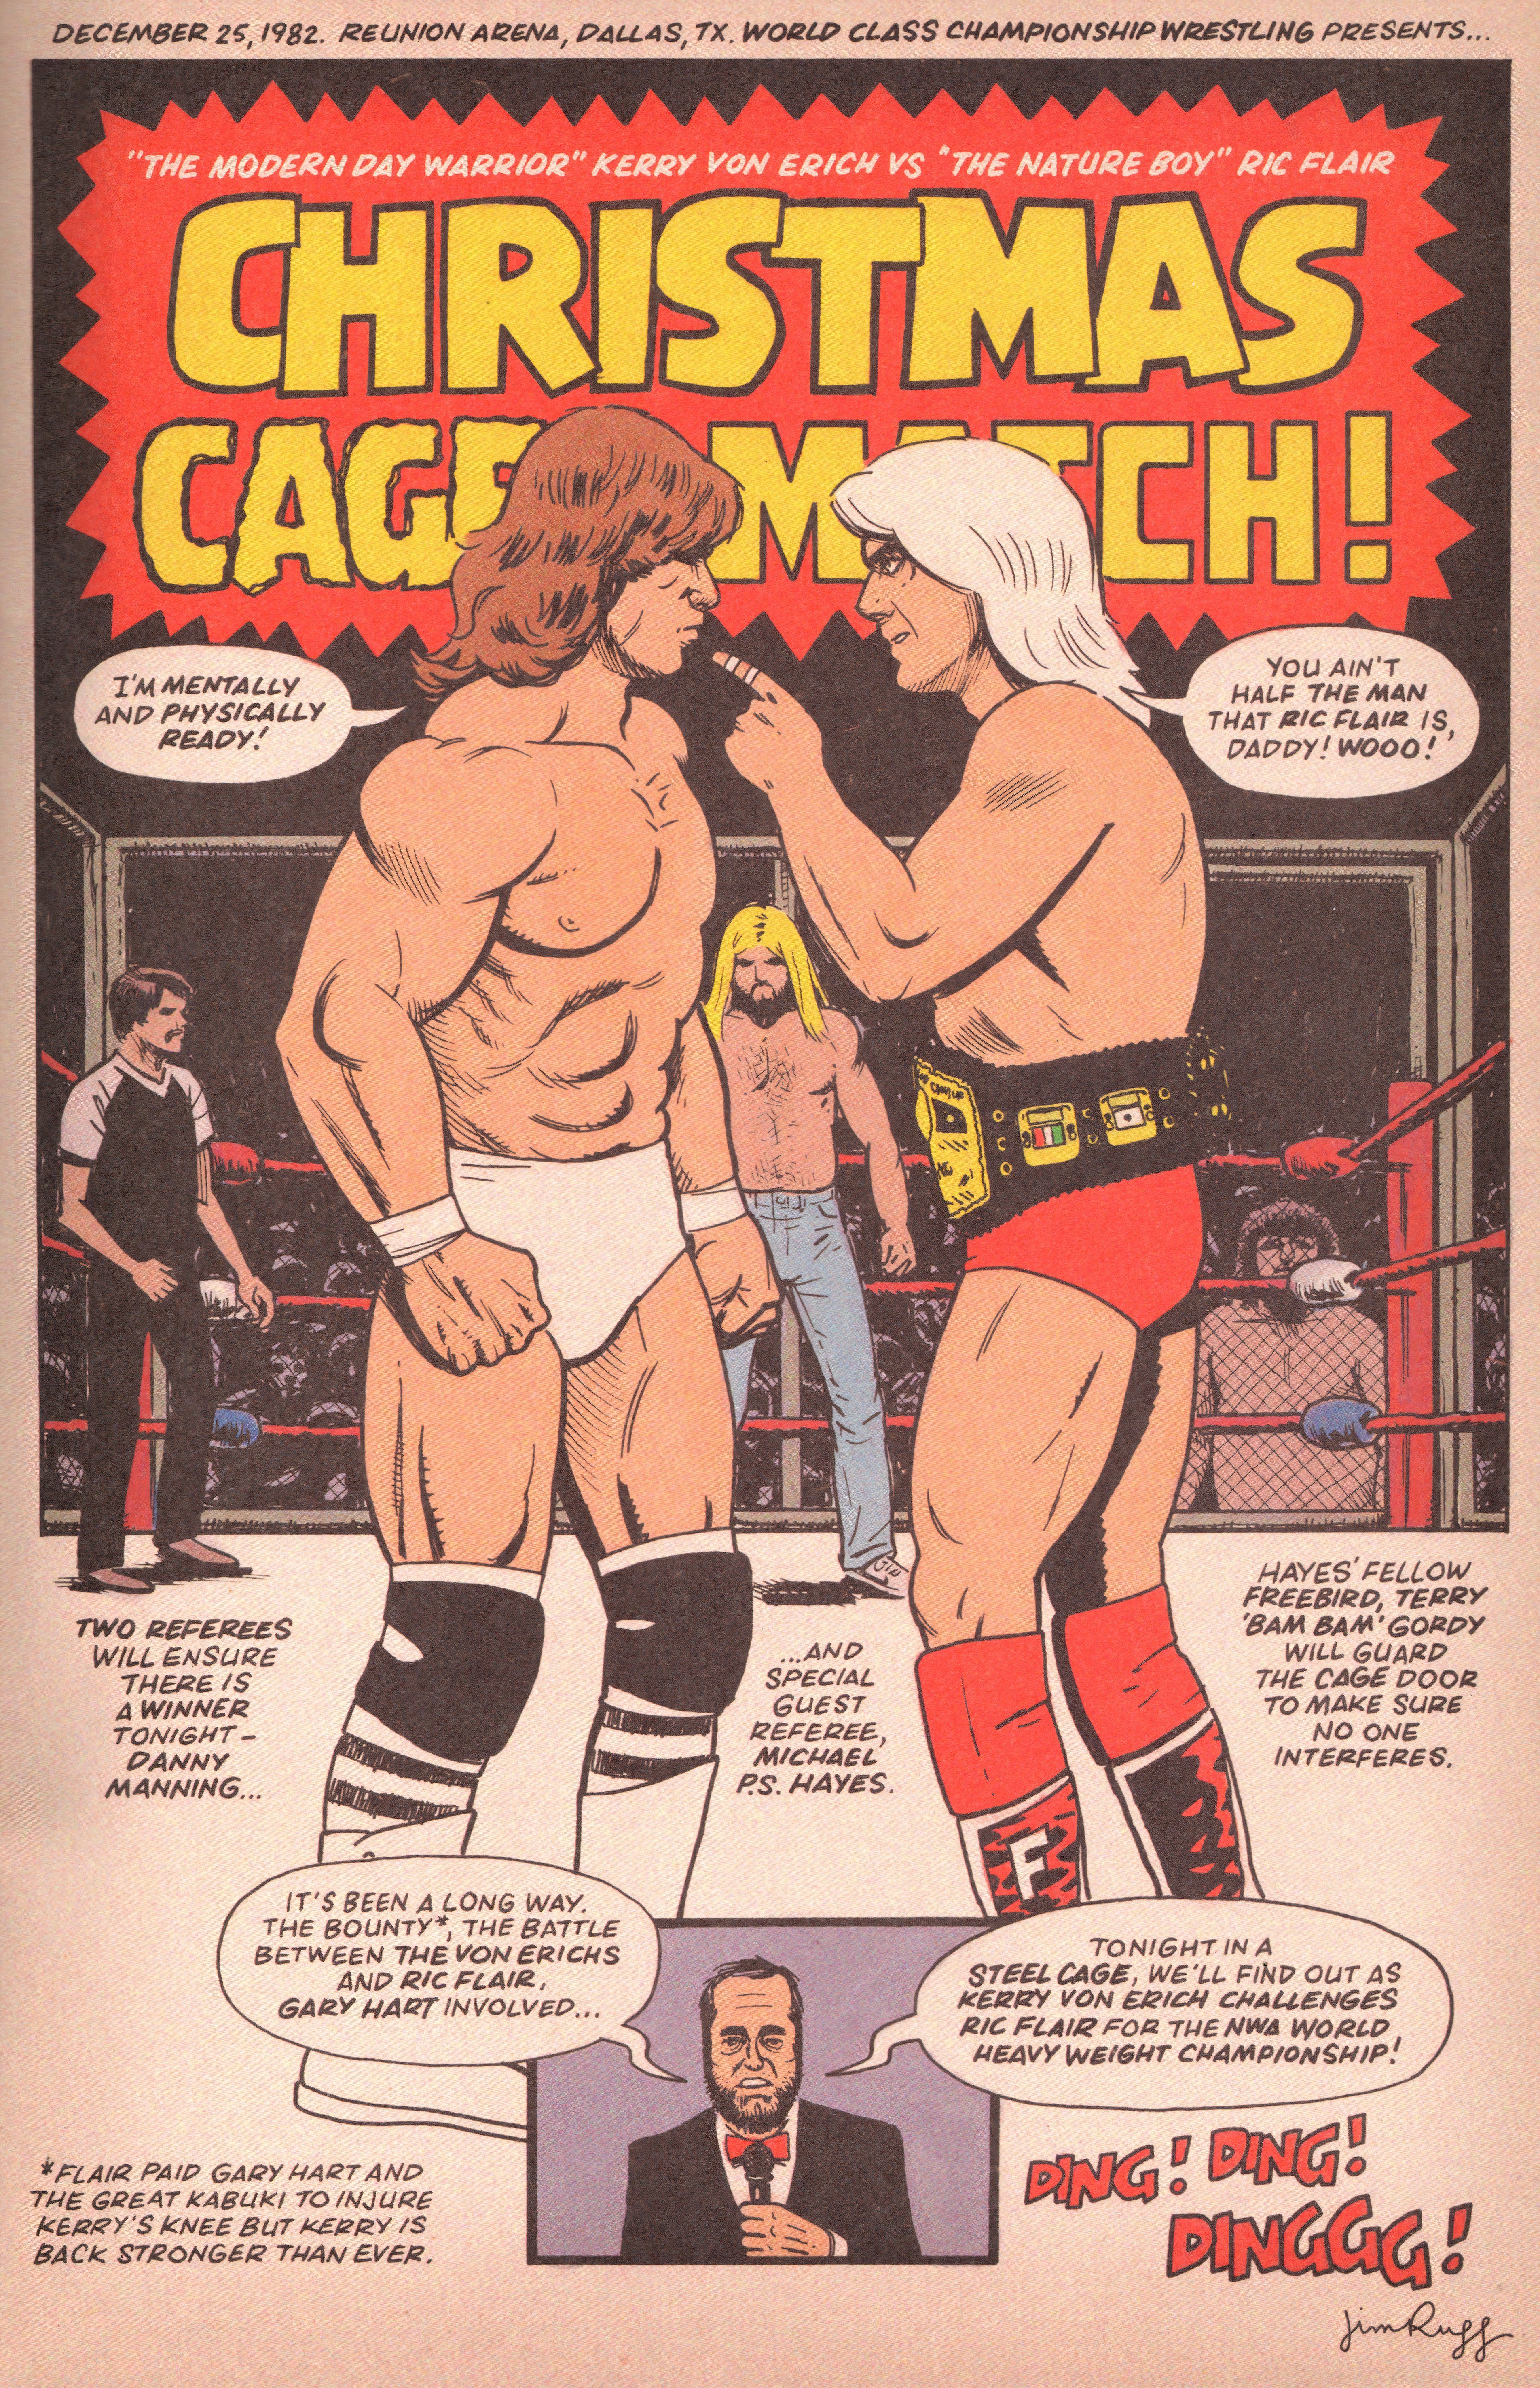 Conspiracy Comics #1 Kerry Von Erich and Ric Flair compete in a wrestling ring